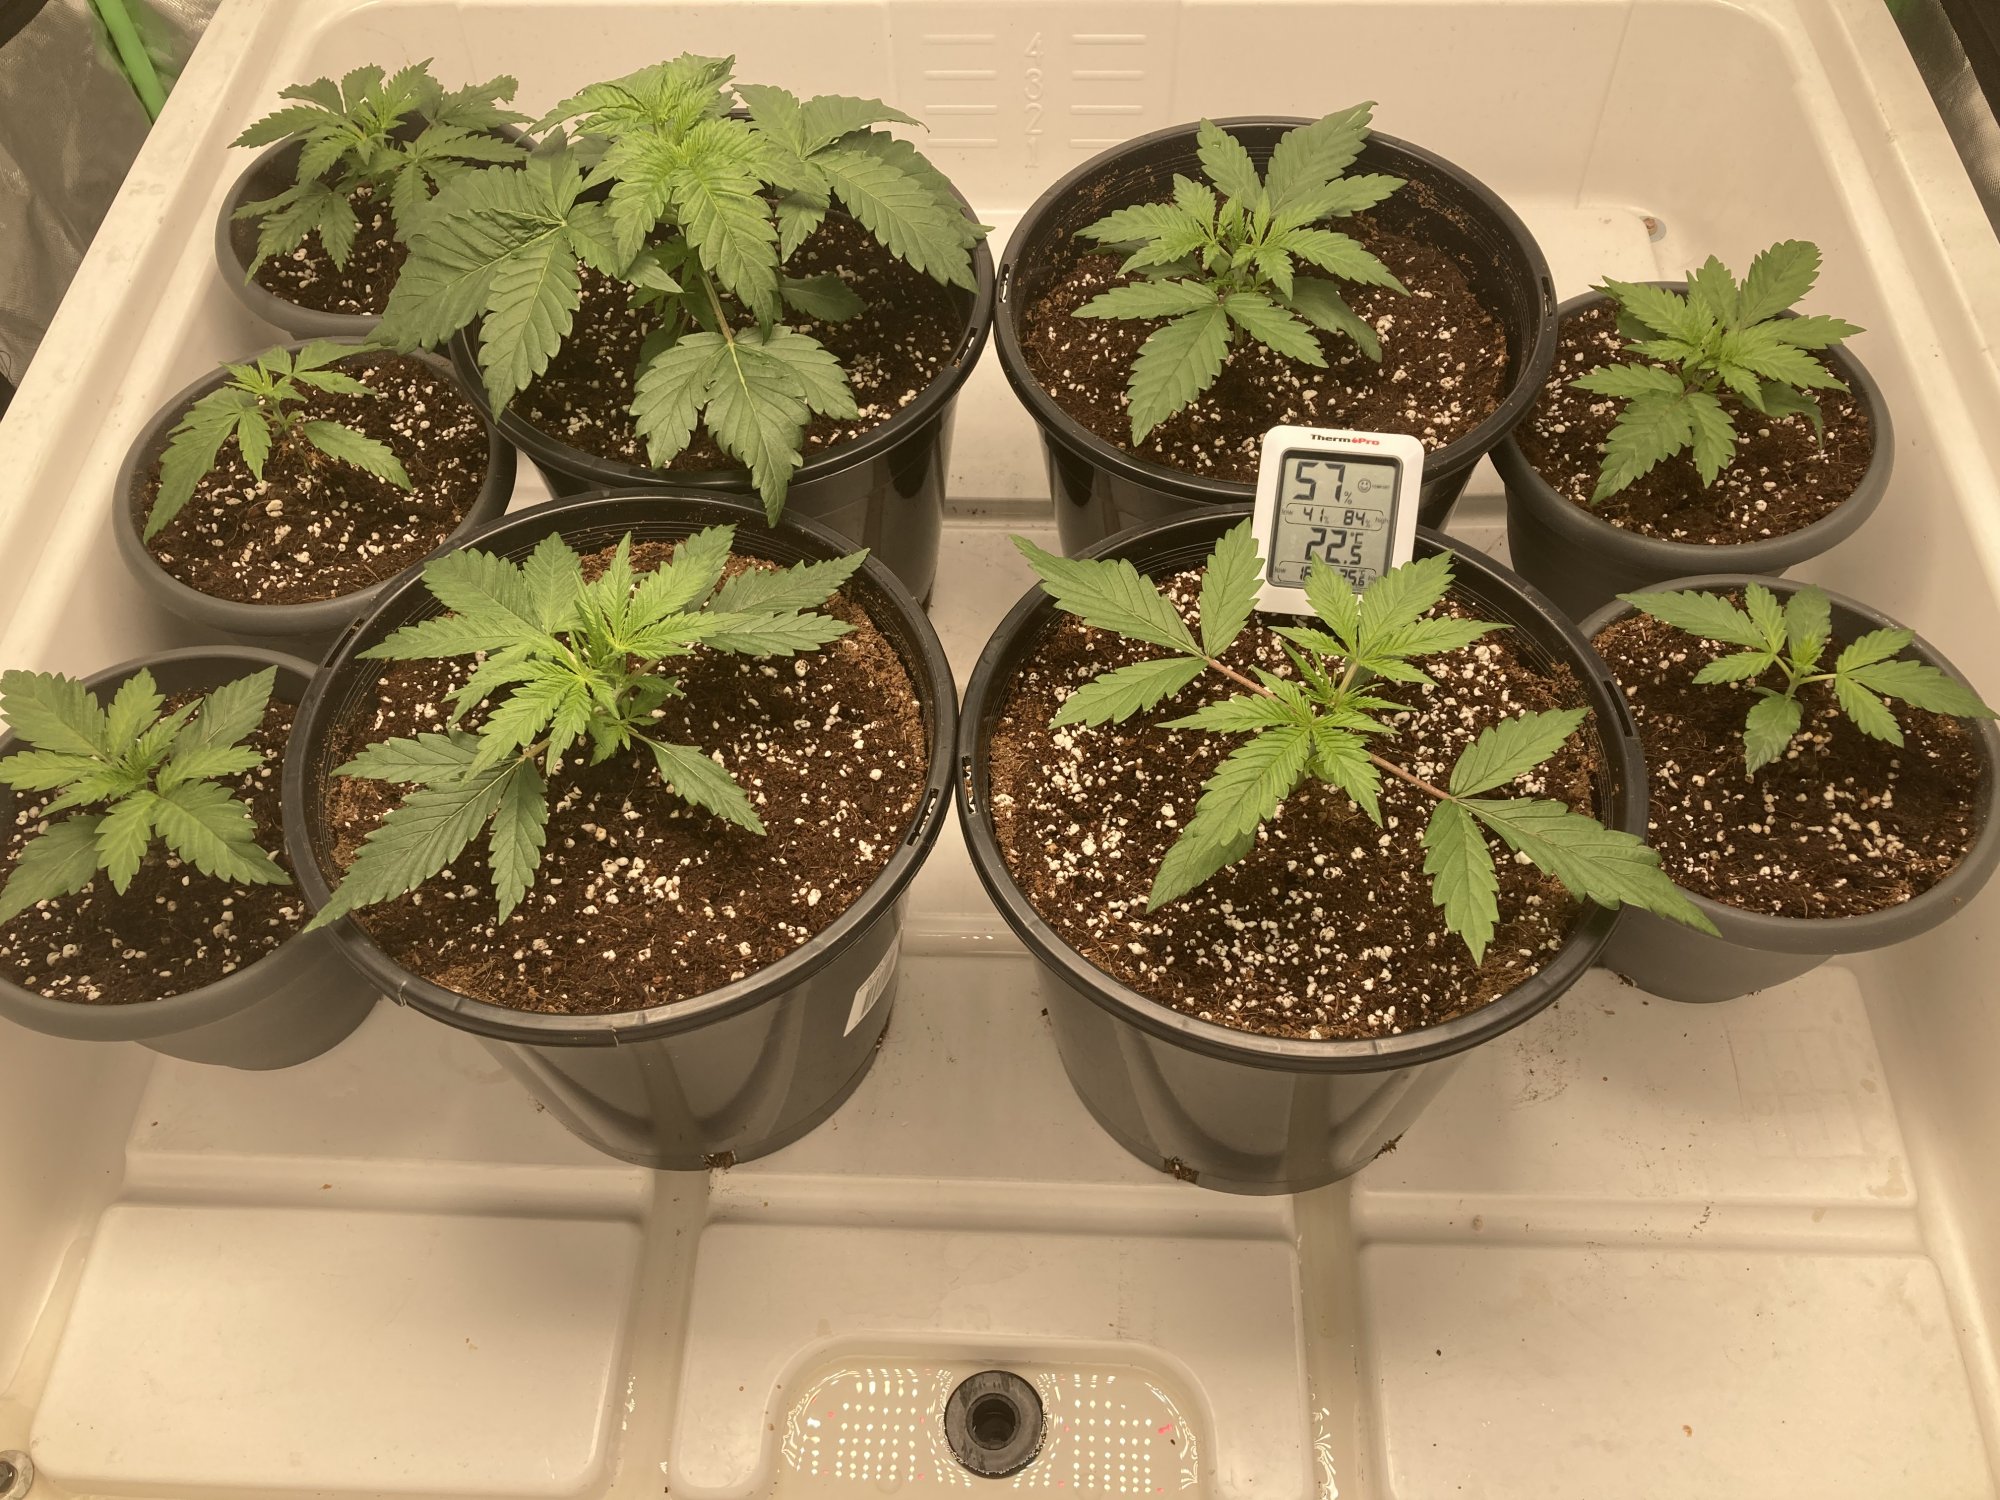 Day 15 from seed   they are powering 2